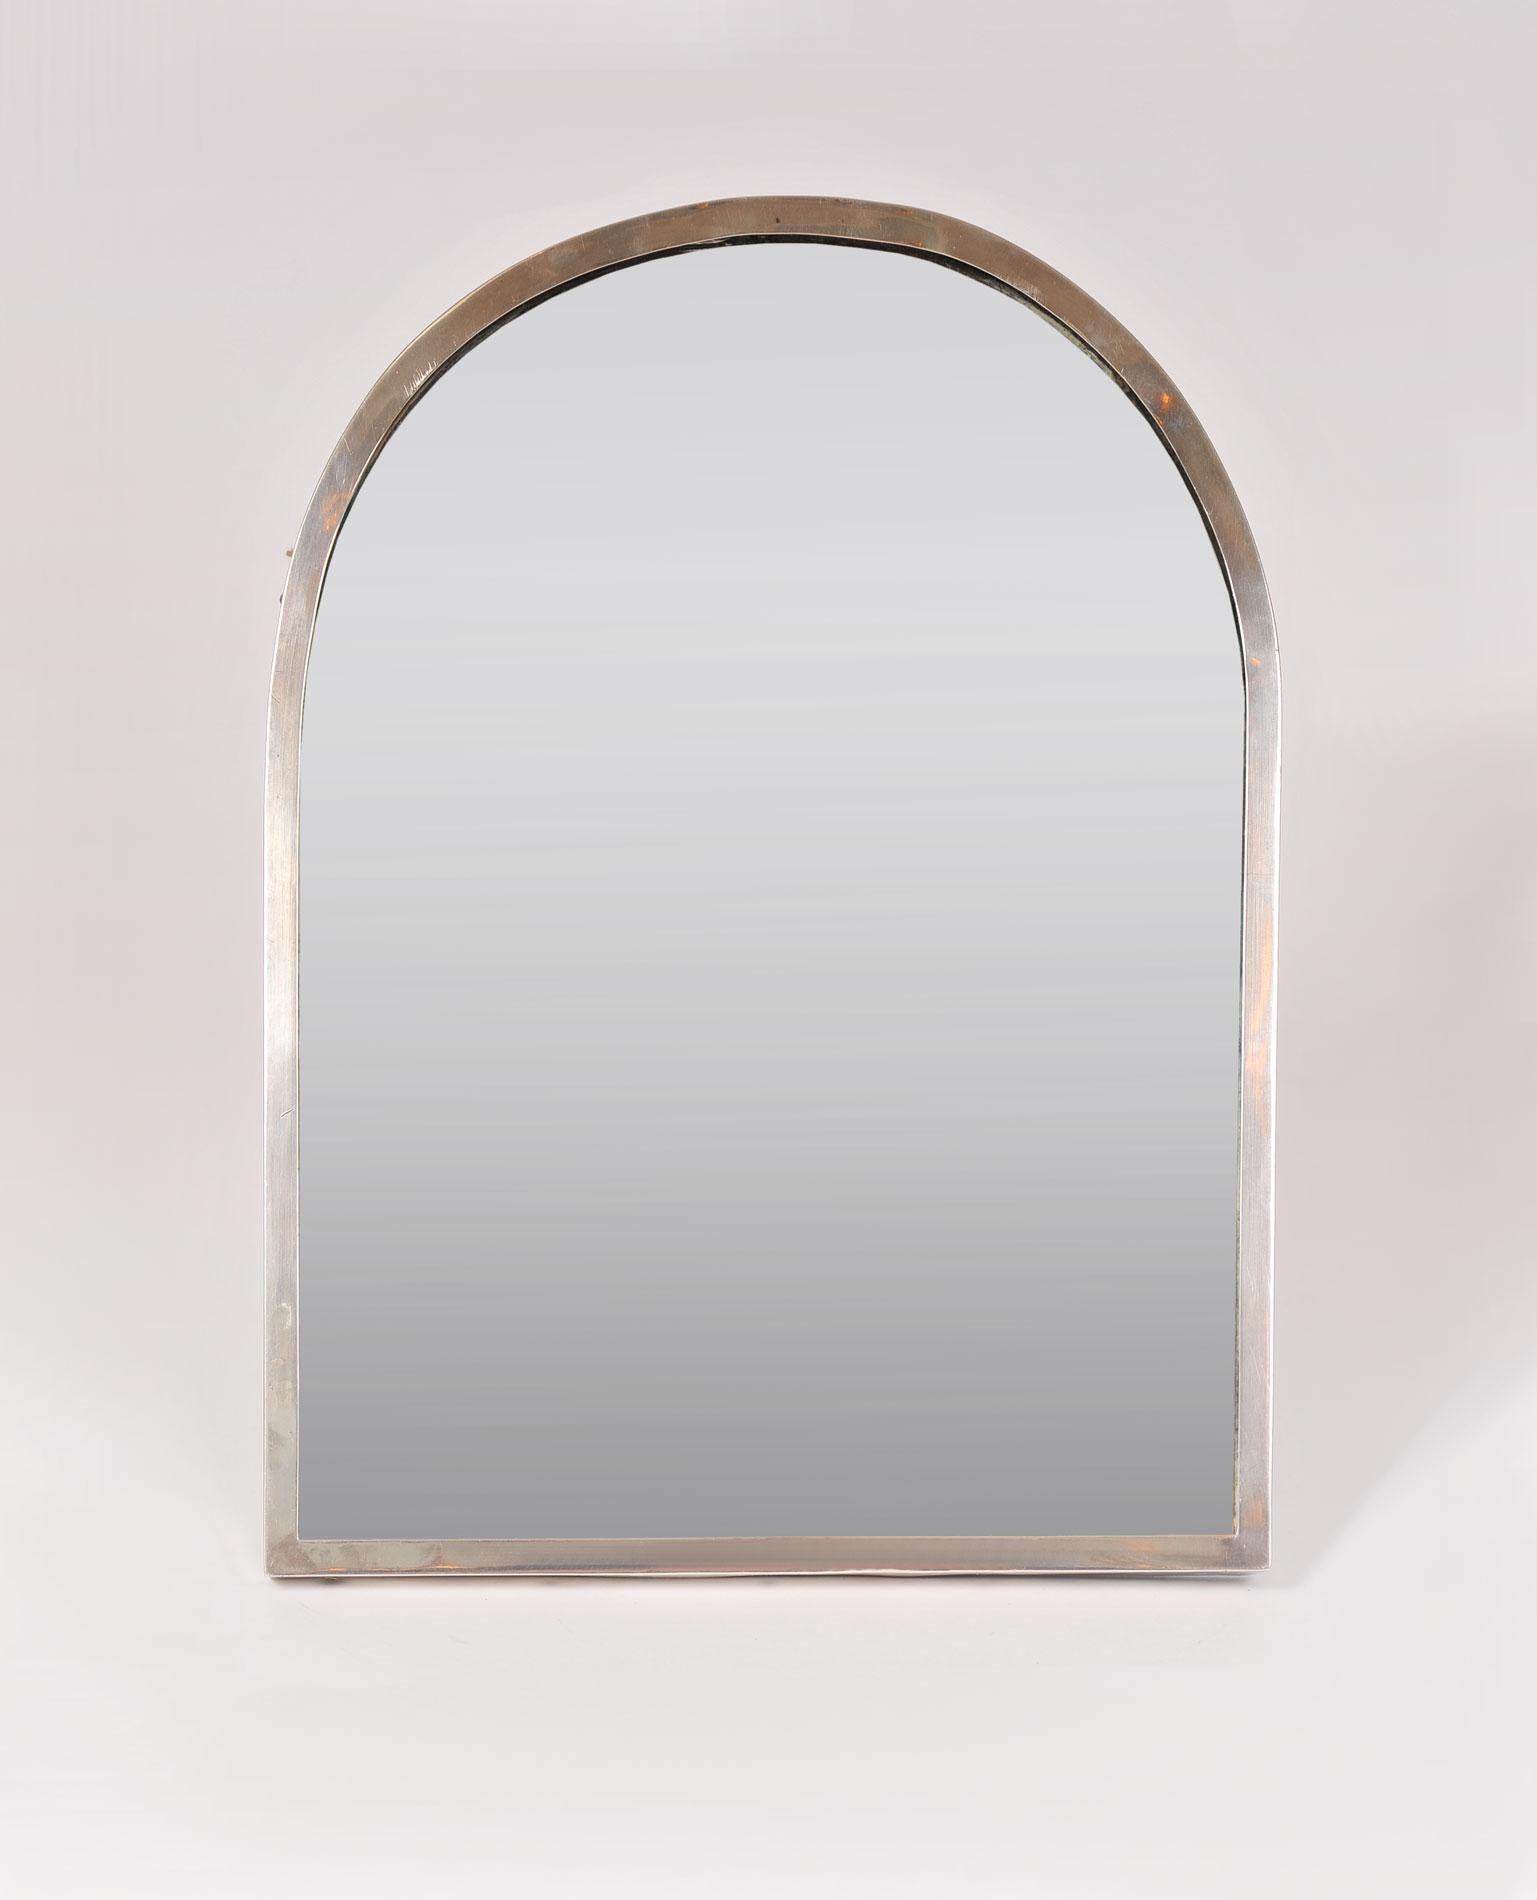 Arch mirror with sterling silver frame and shaped back strut, signed G Keller, Paris.